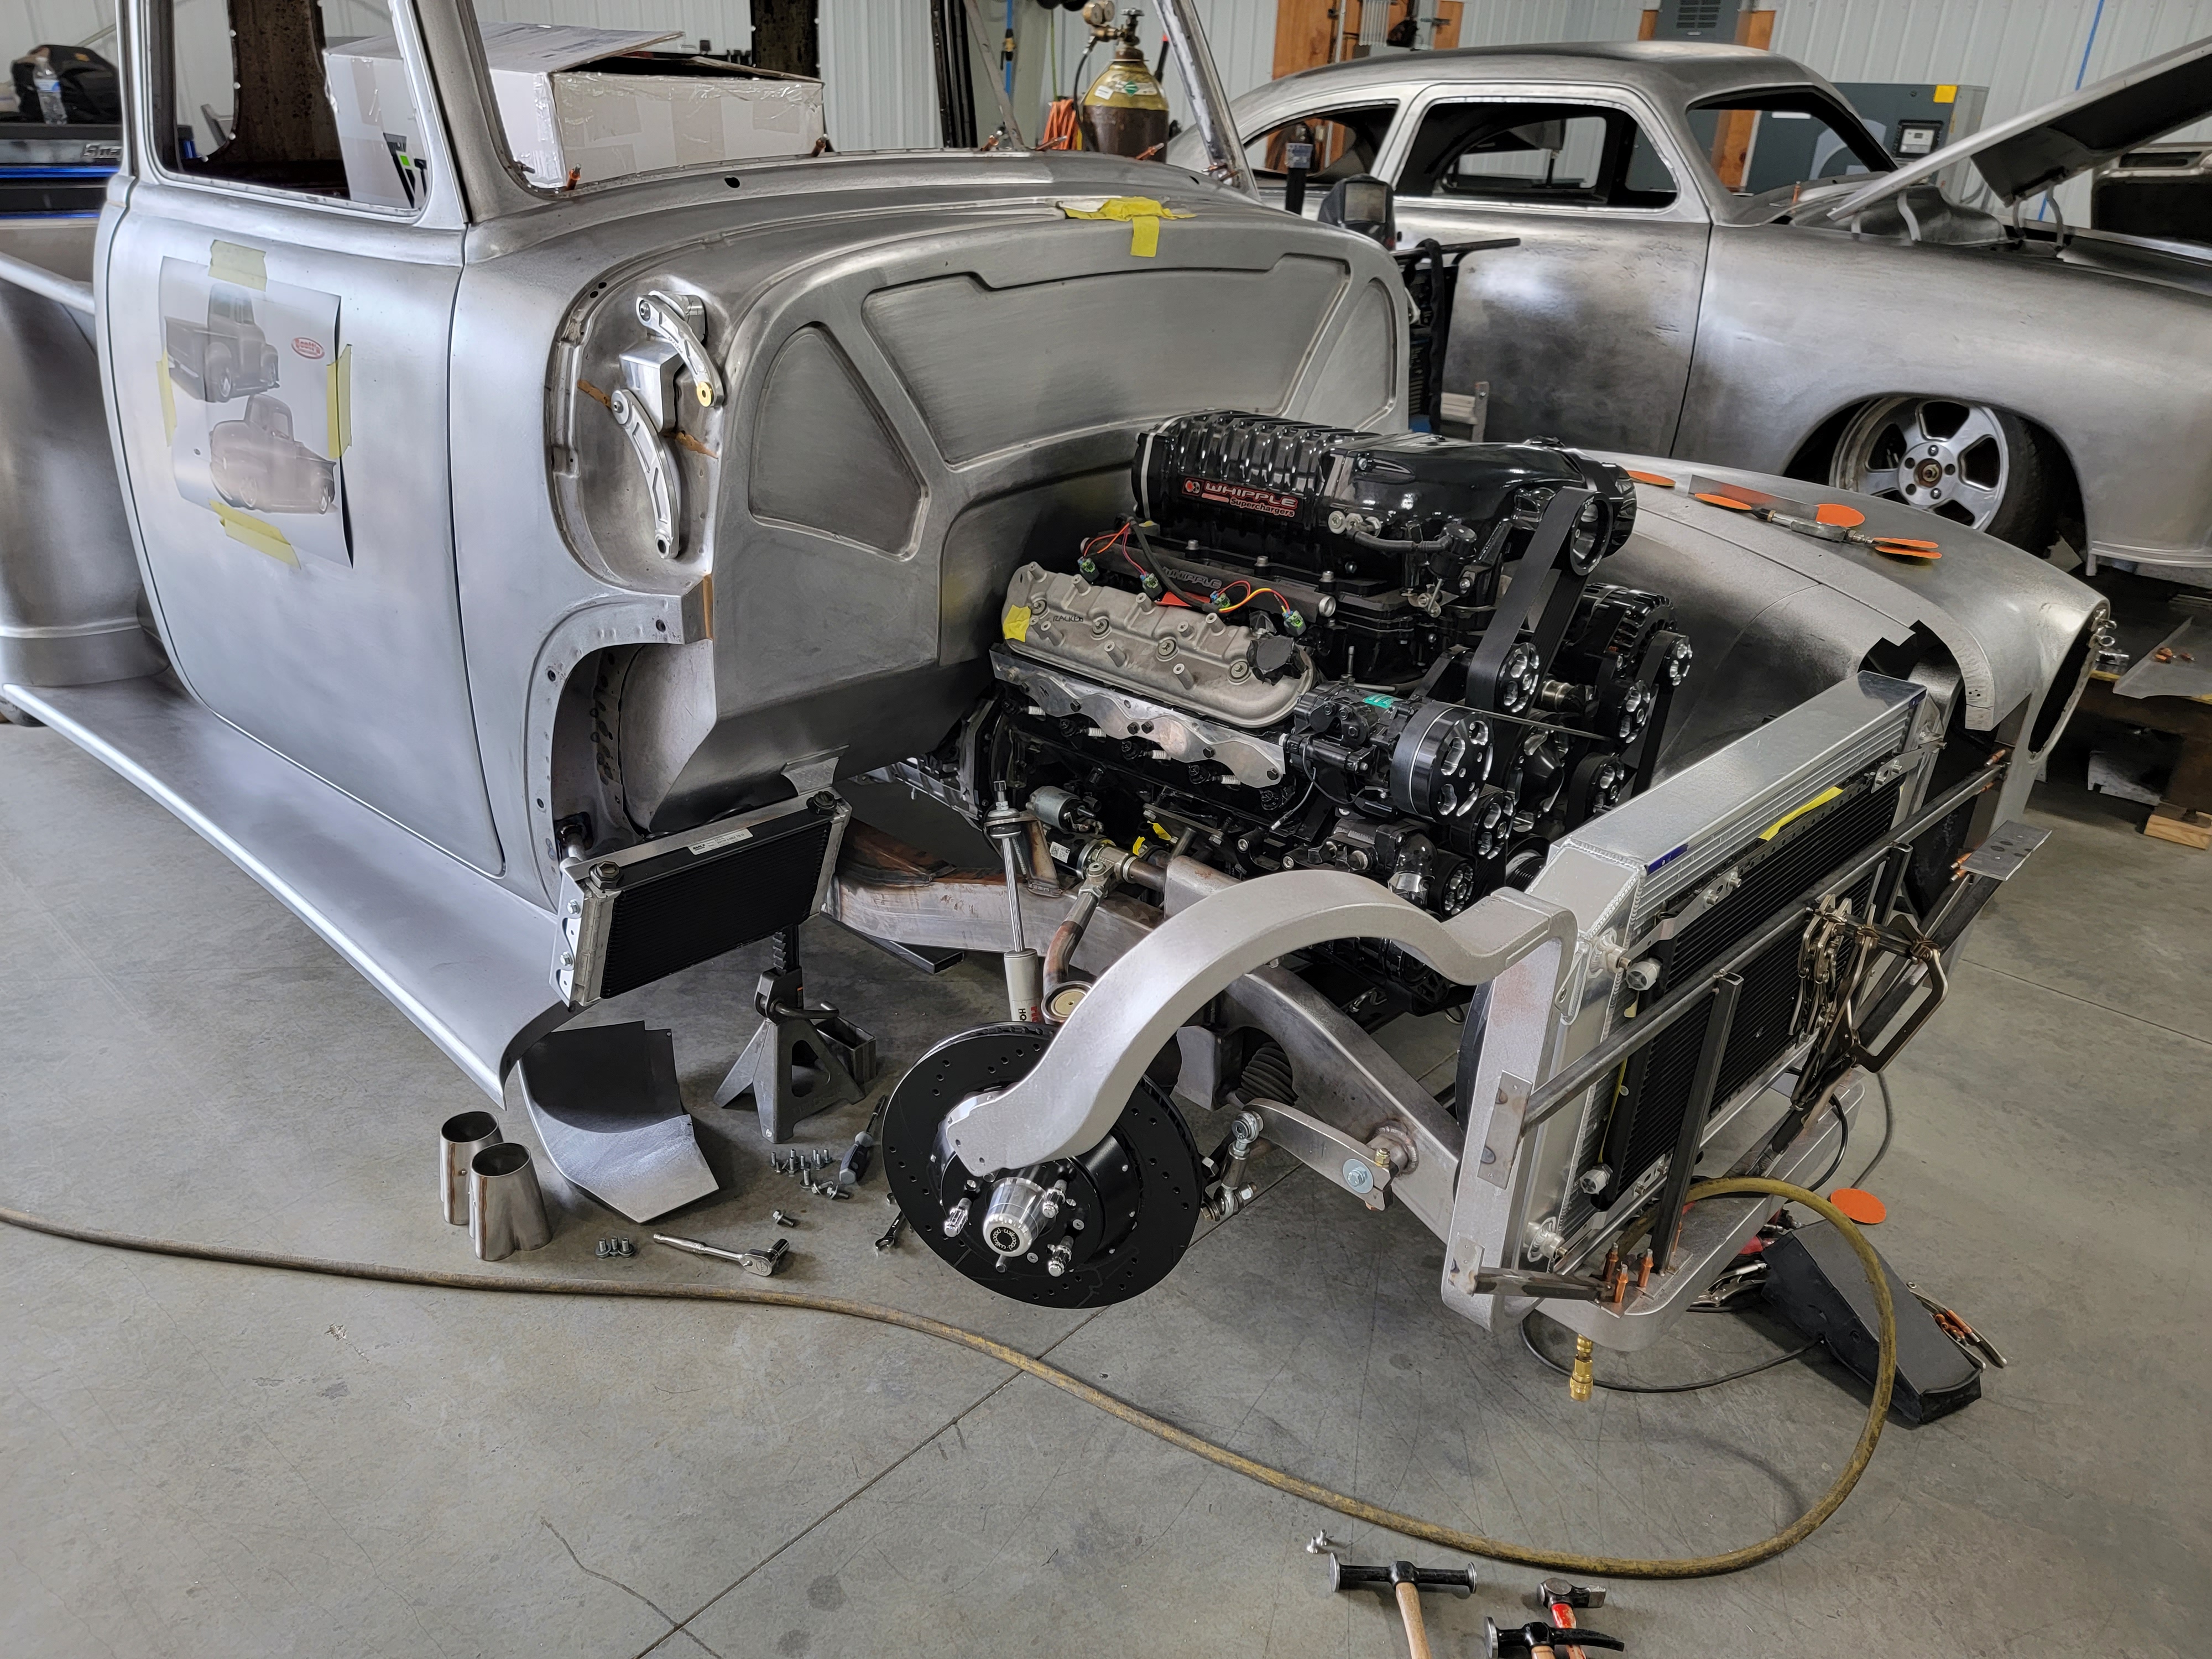 scotts-hotrods-51-chevy-project-truck-2958